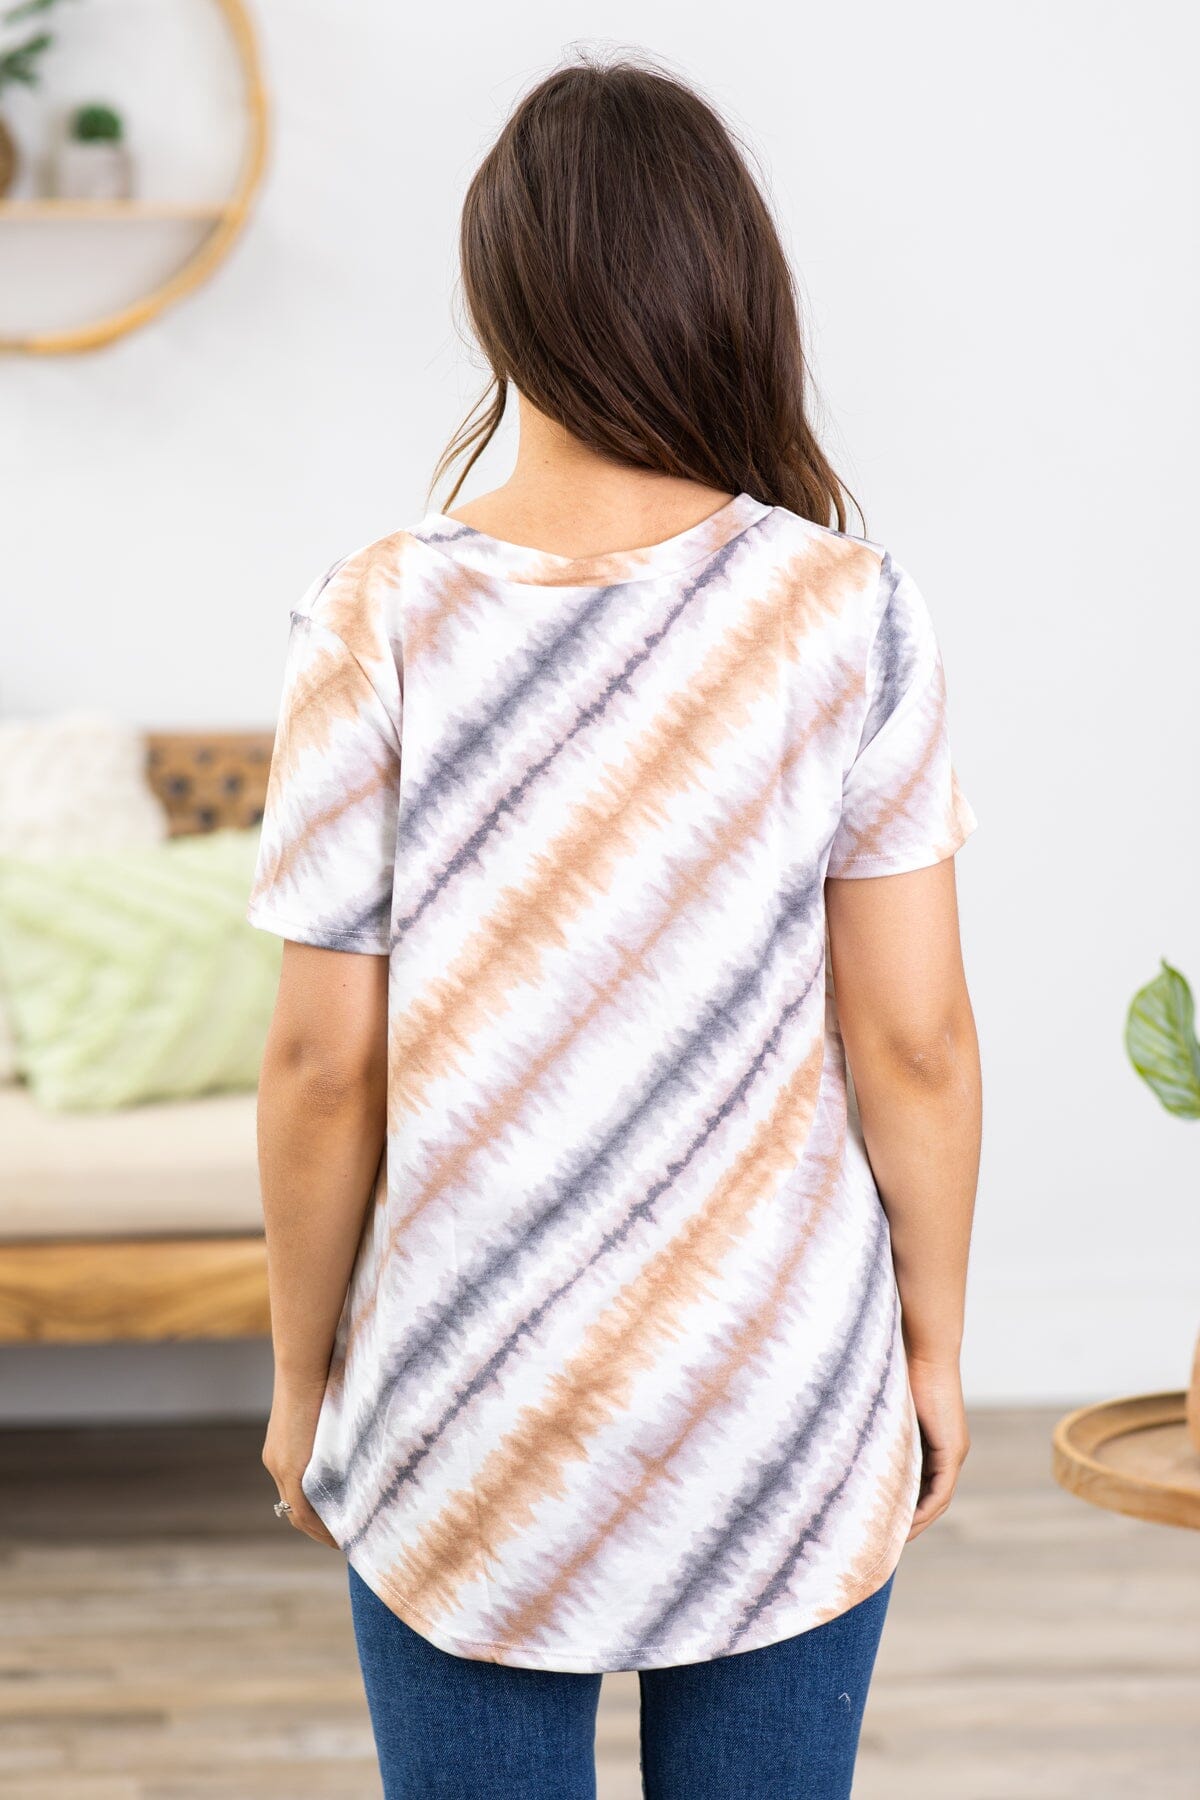 Graphite and Camel Stripe Tie Dye Top - Filly Flair